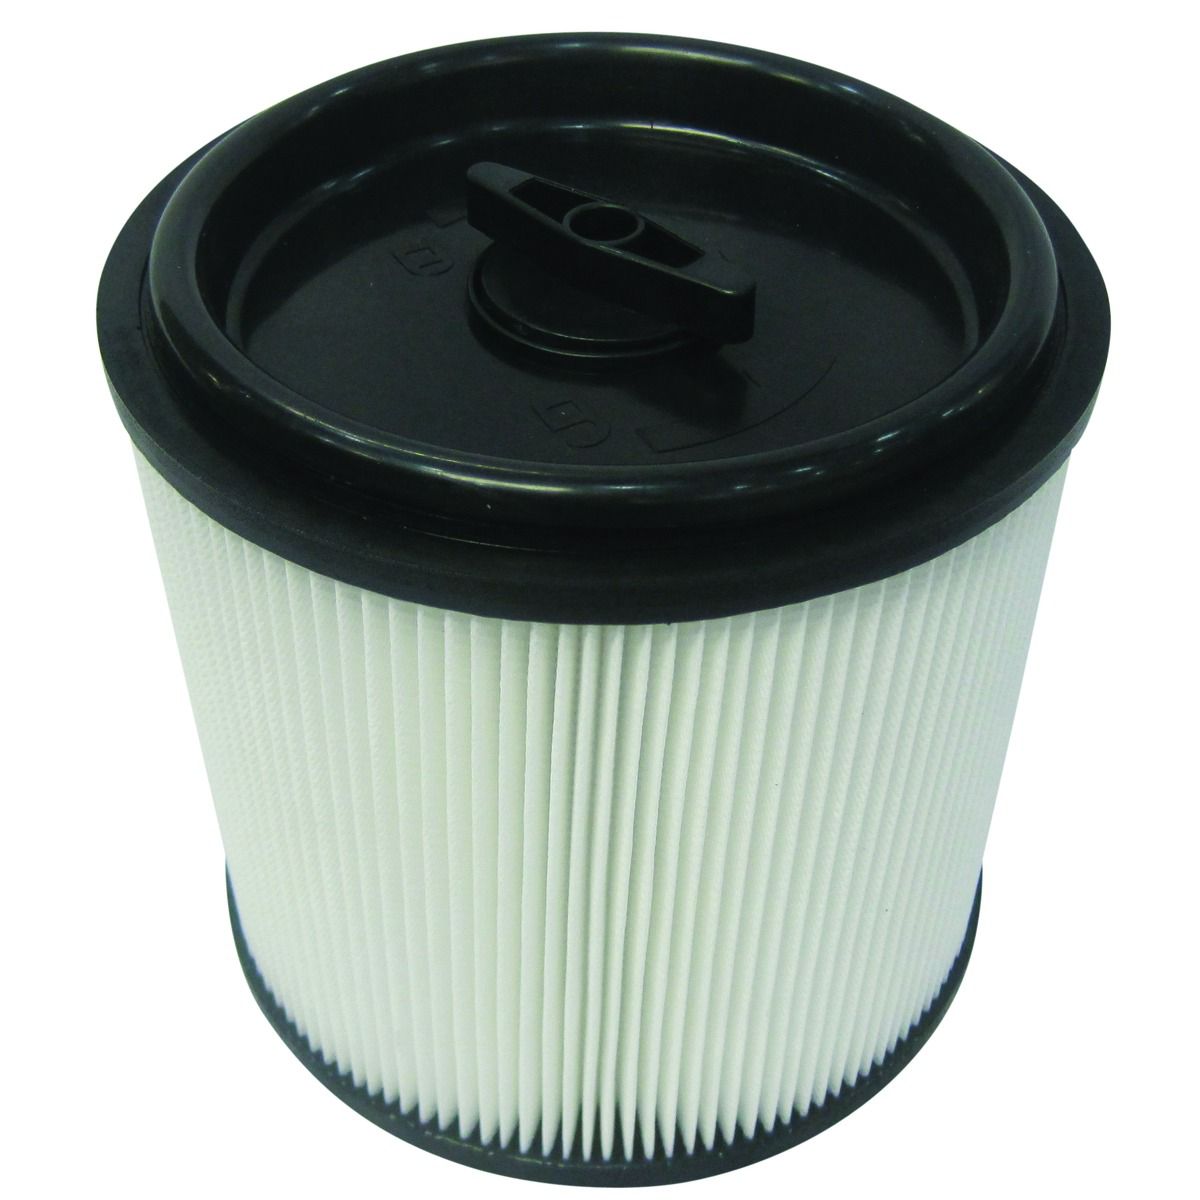 Image of Wickes Combined Filter for Wet & Dry Vacuum Cleaner